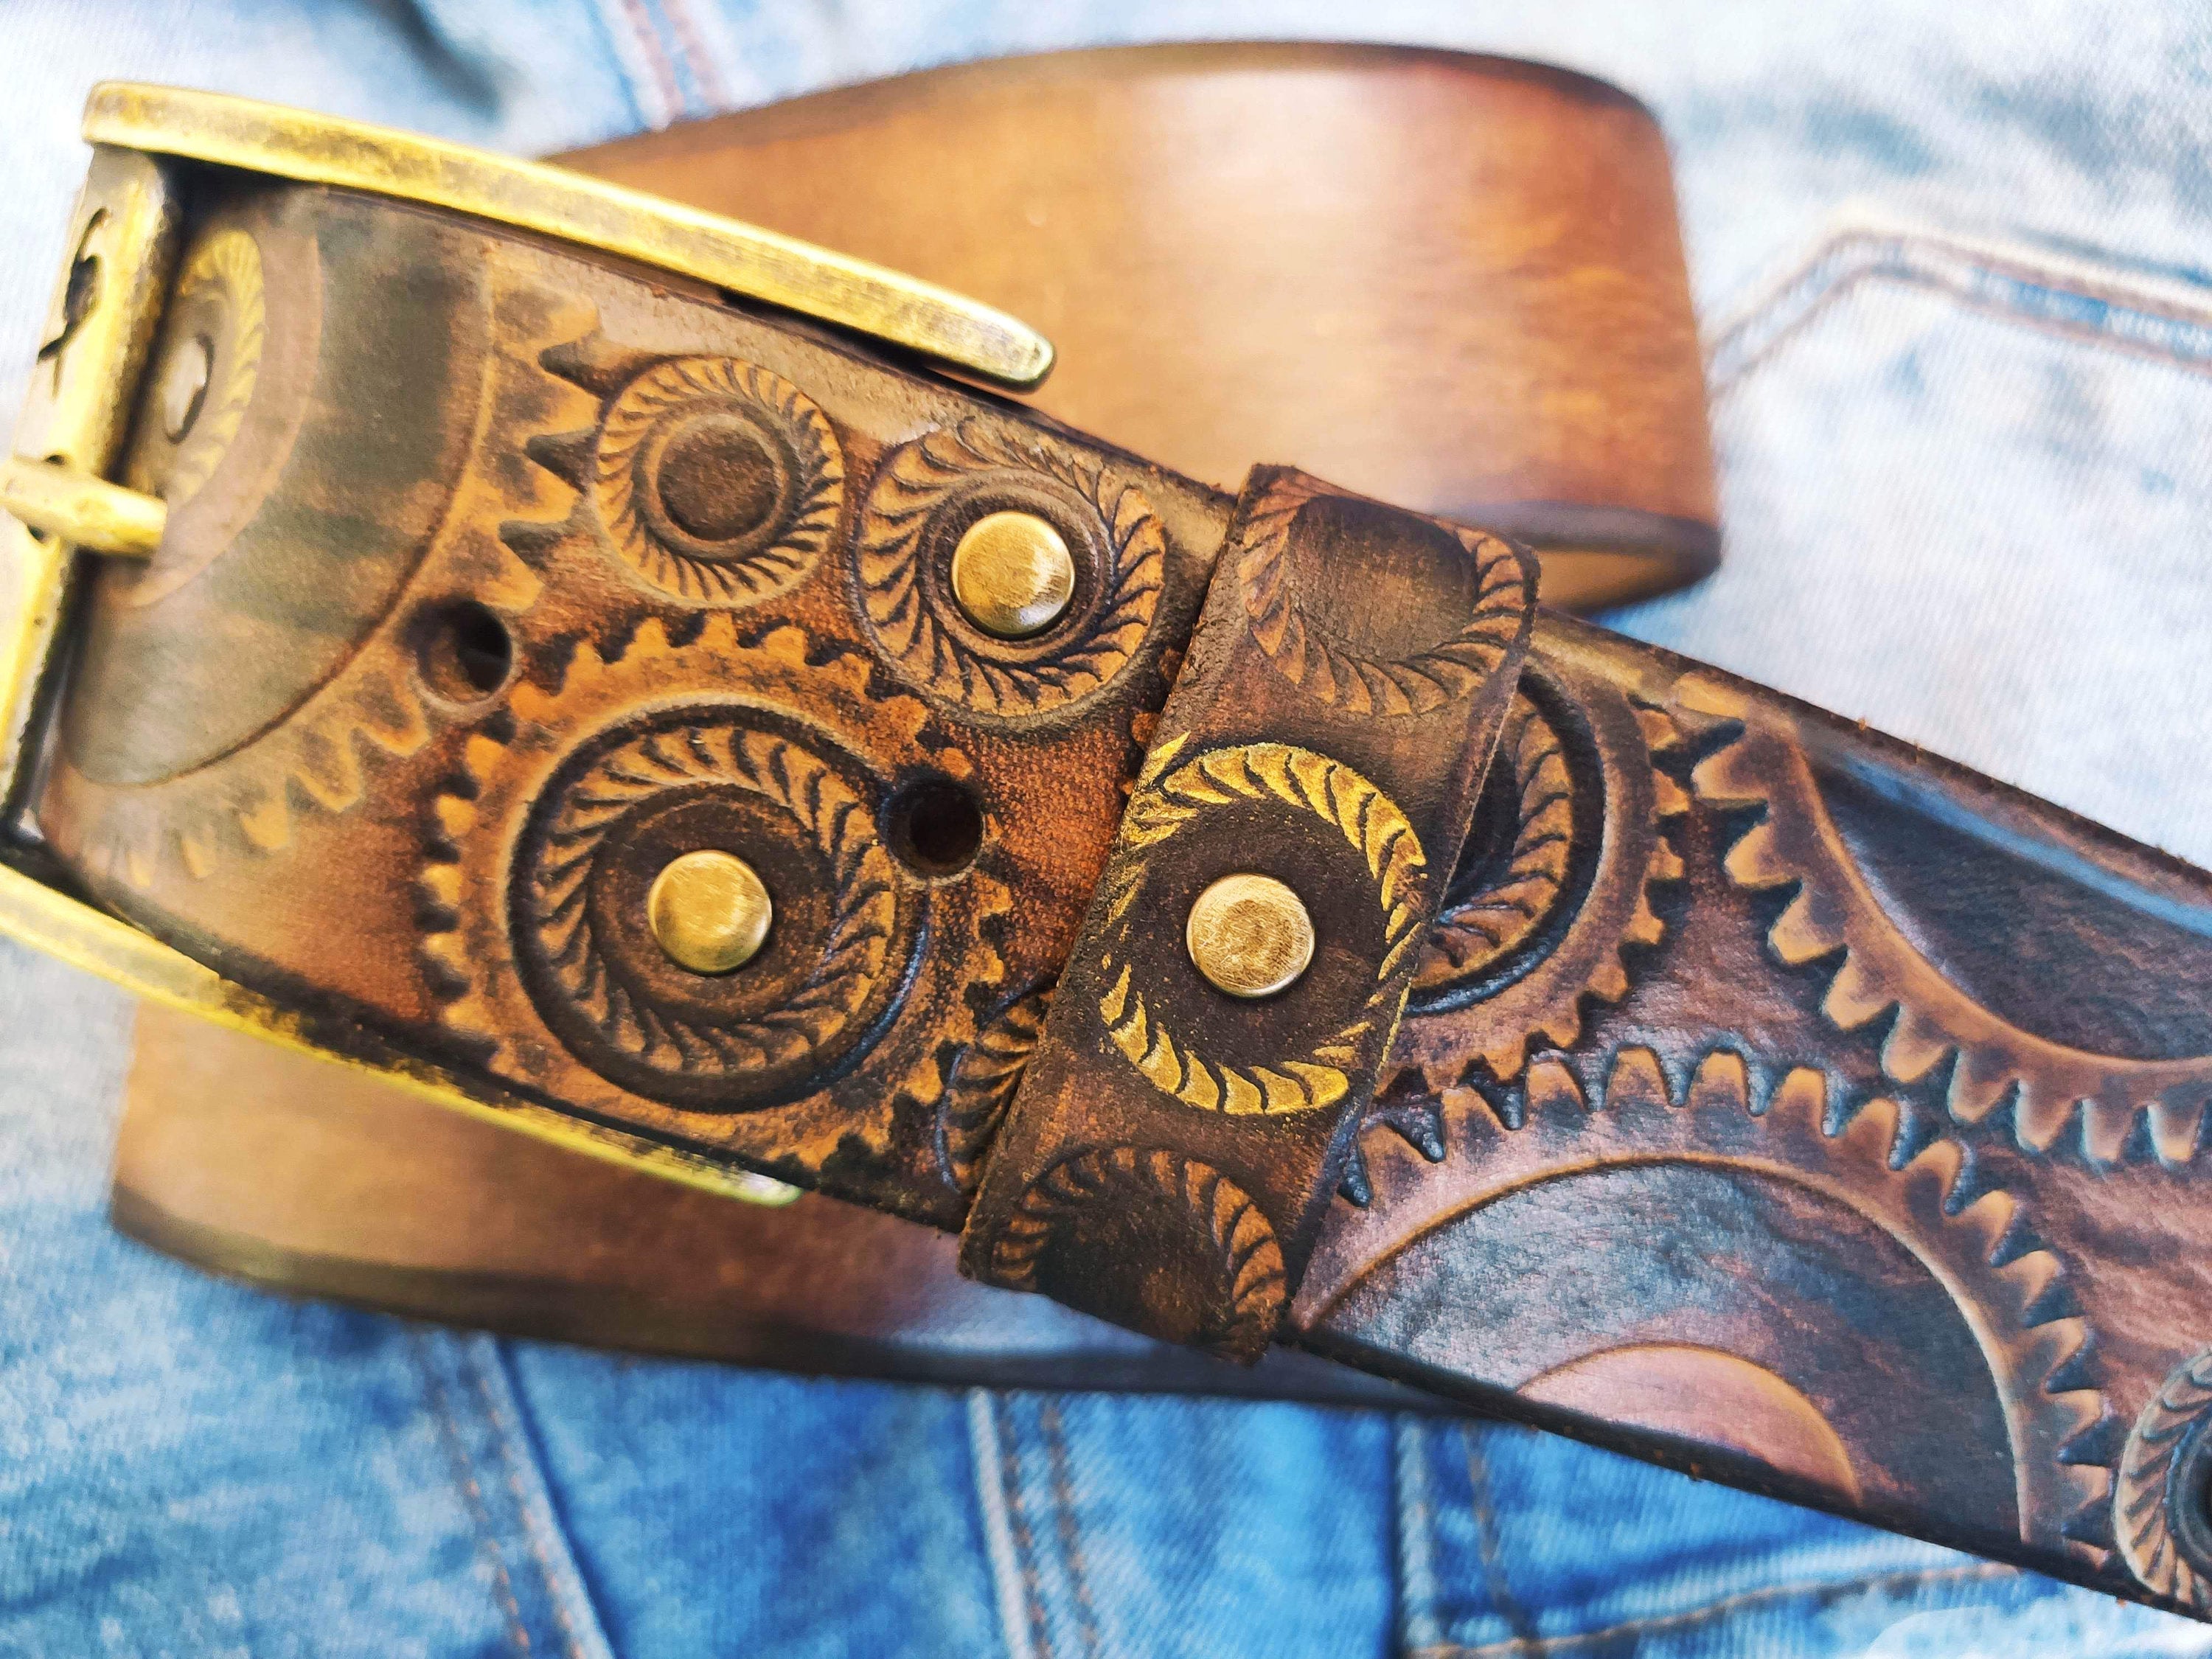 Biker Belt - Brown with Touch of Gold